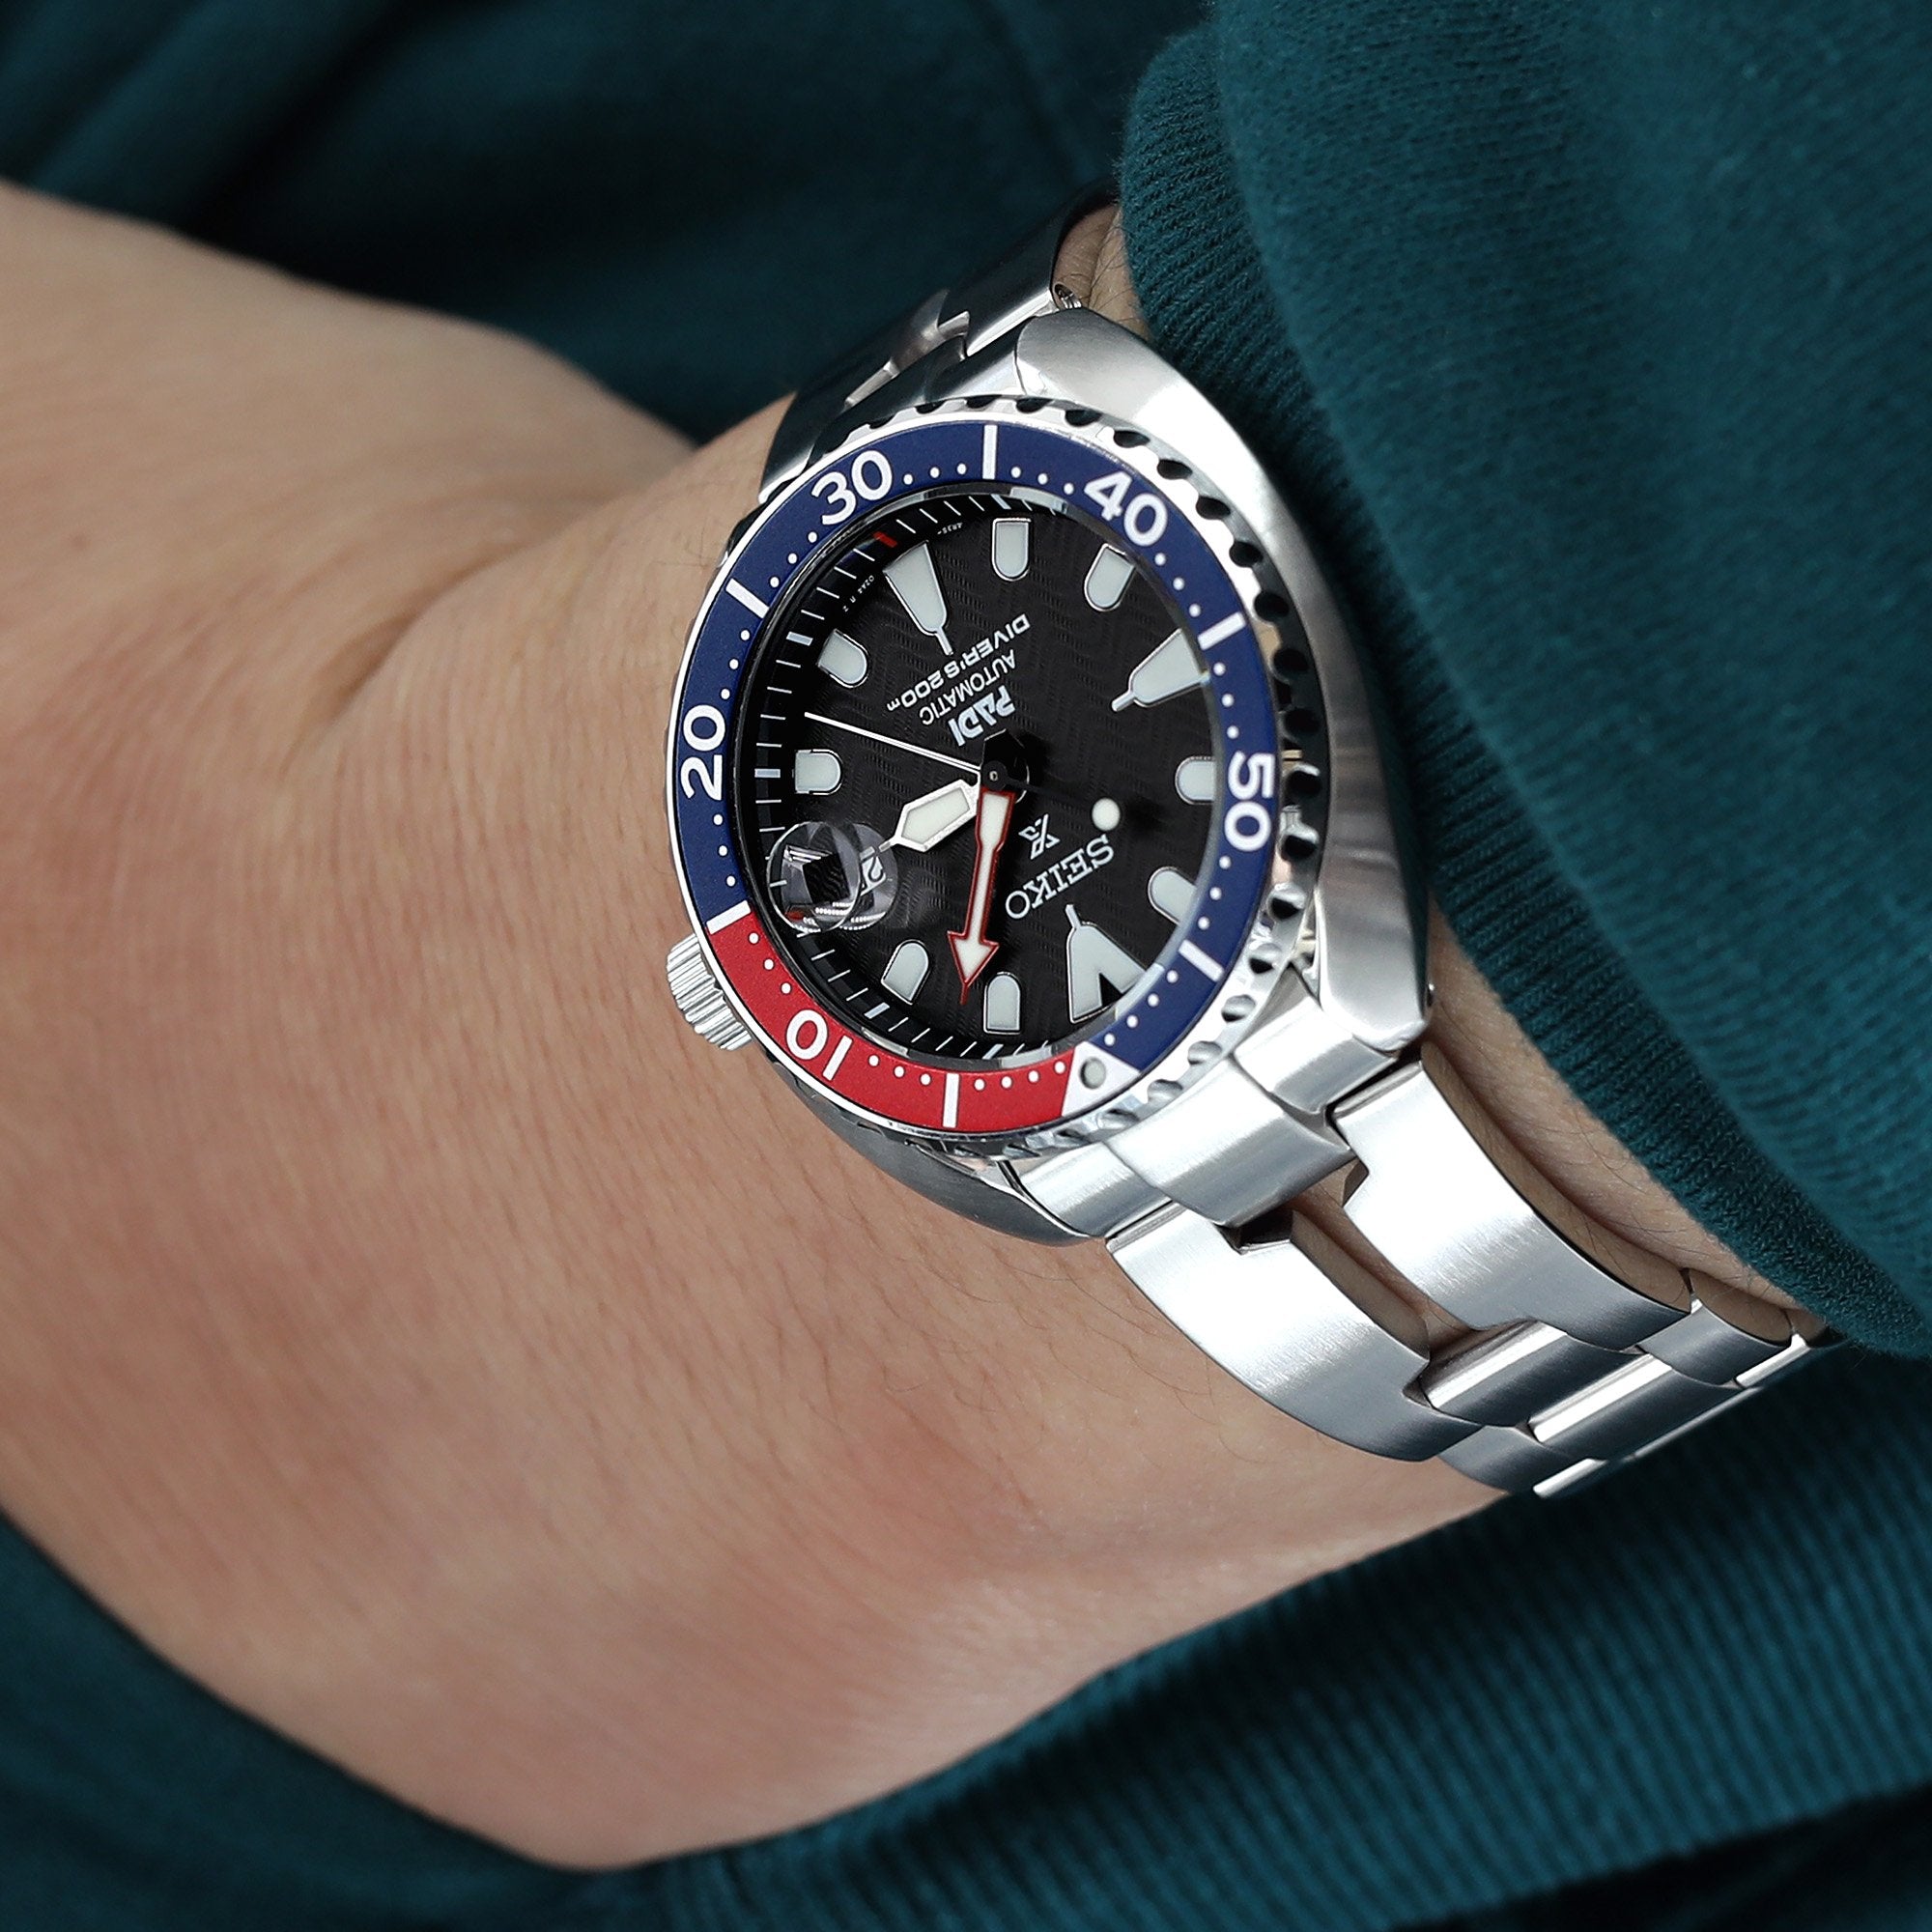 A Razor watch band by Strapcode  with a curved fit elevates the sporty look of the Seiko Mini Turtle watch by Strapcode 